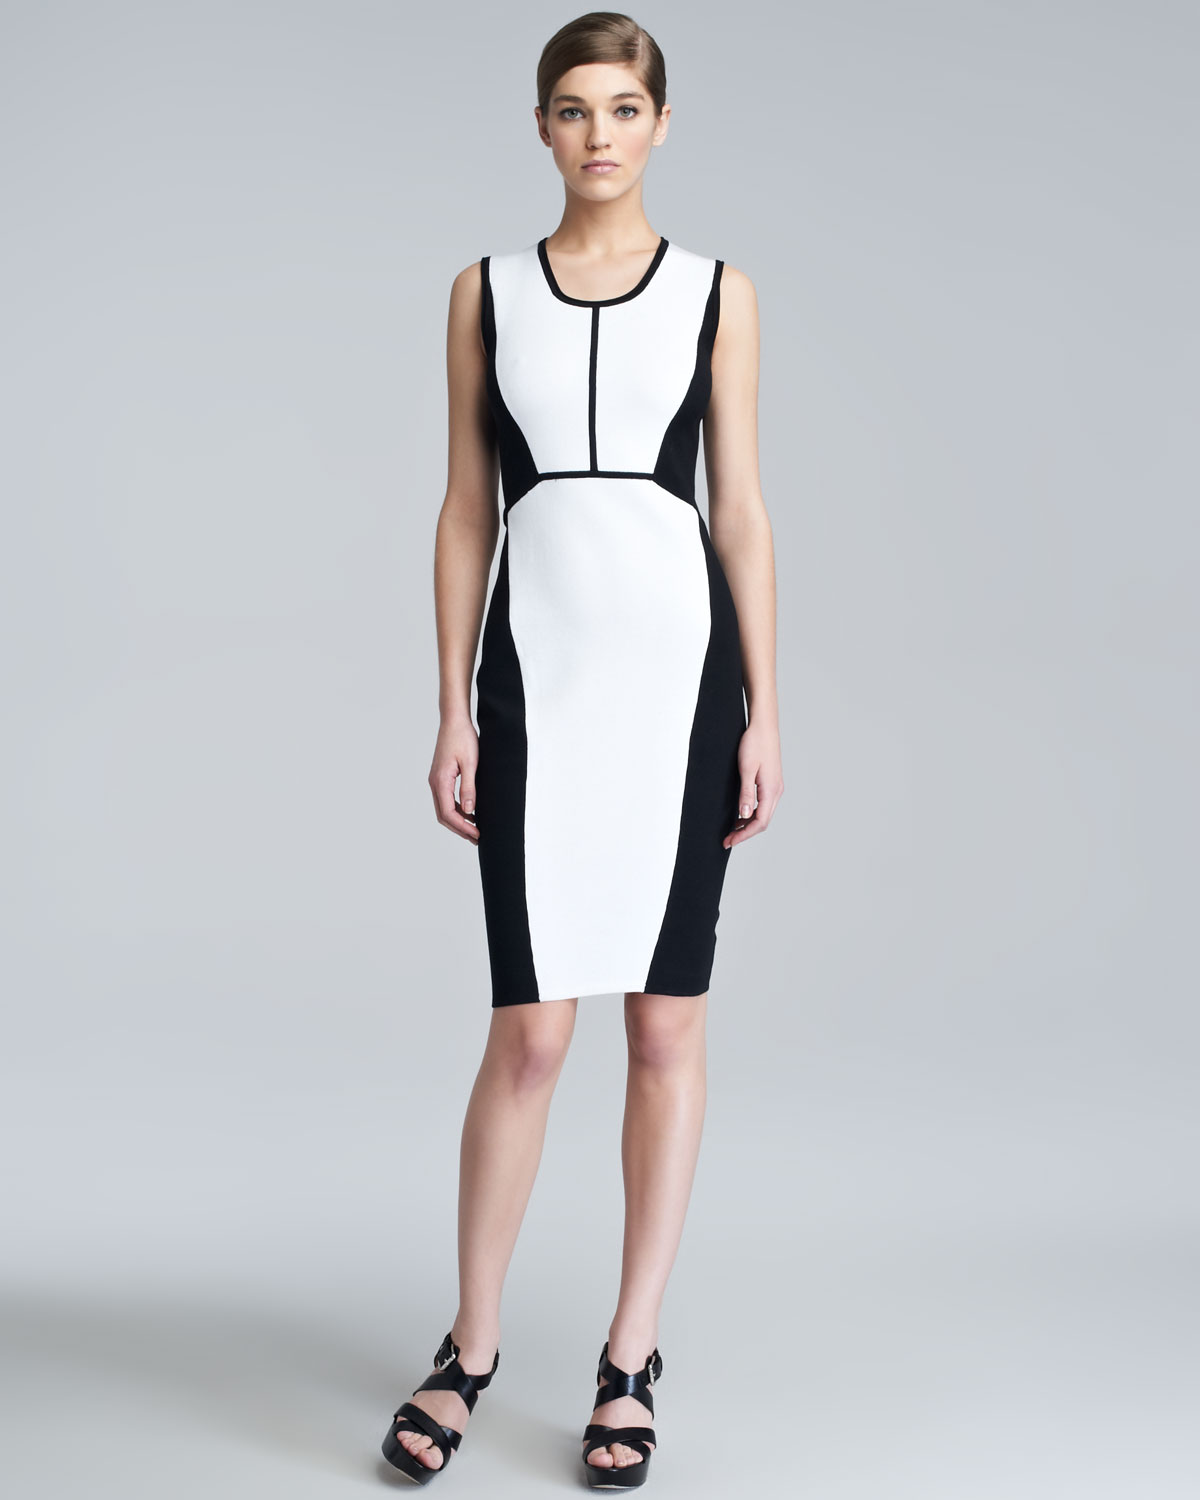 Lyst - Narciso Rodriguez Contour Colorblock Knit Dress in White